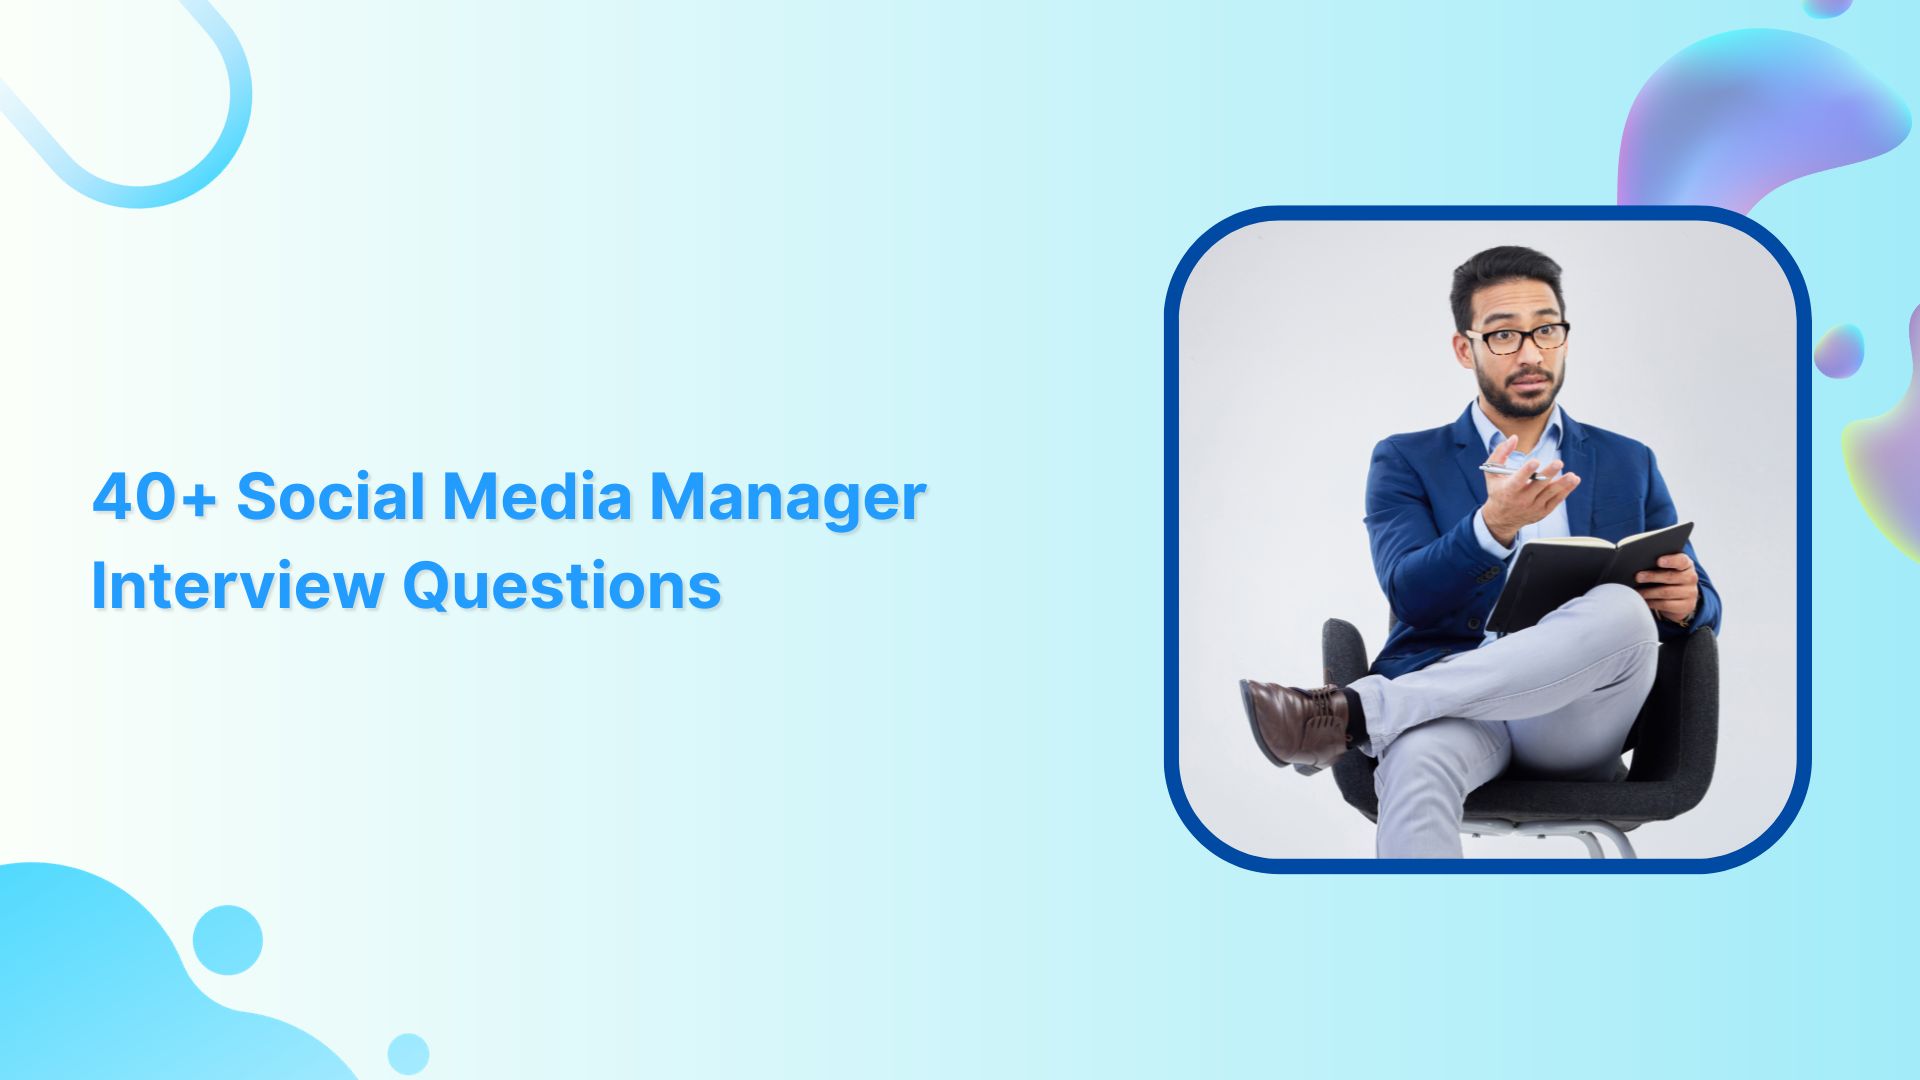 40+ Social Media Manager Interview Questions